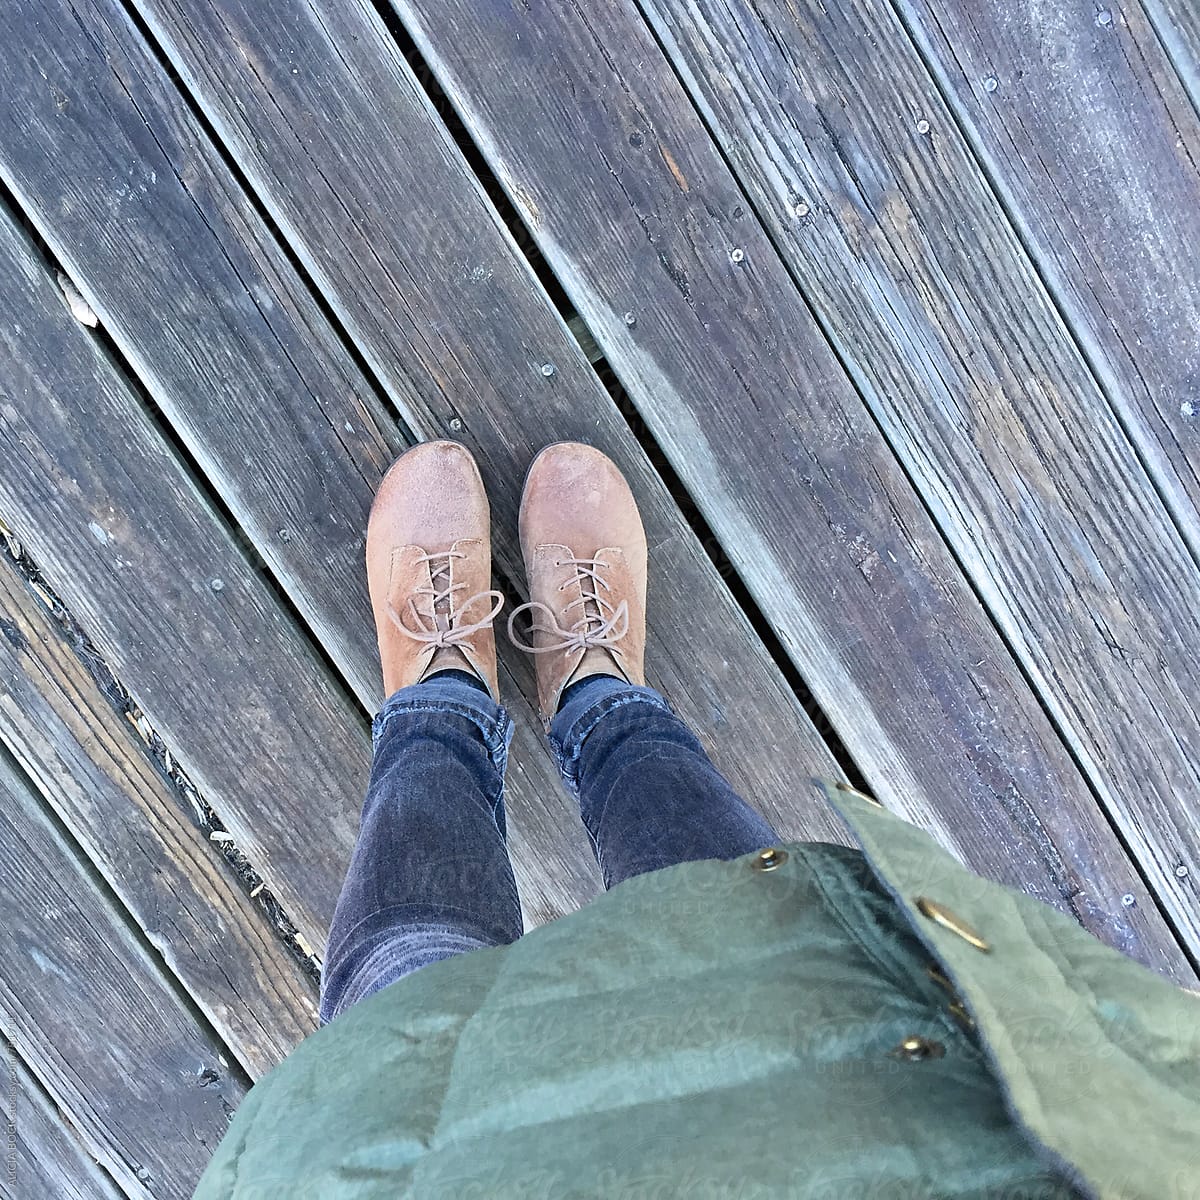 A Woman\'s Feet Standing On A Wood Deck On An Autumn Day